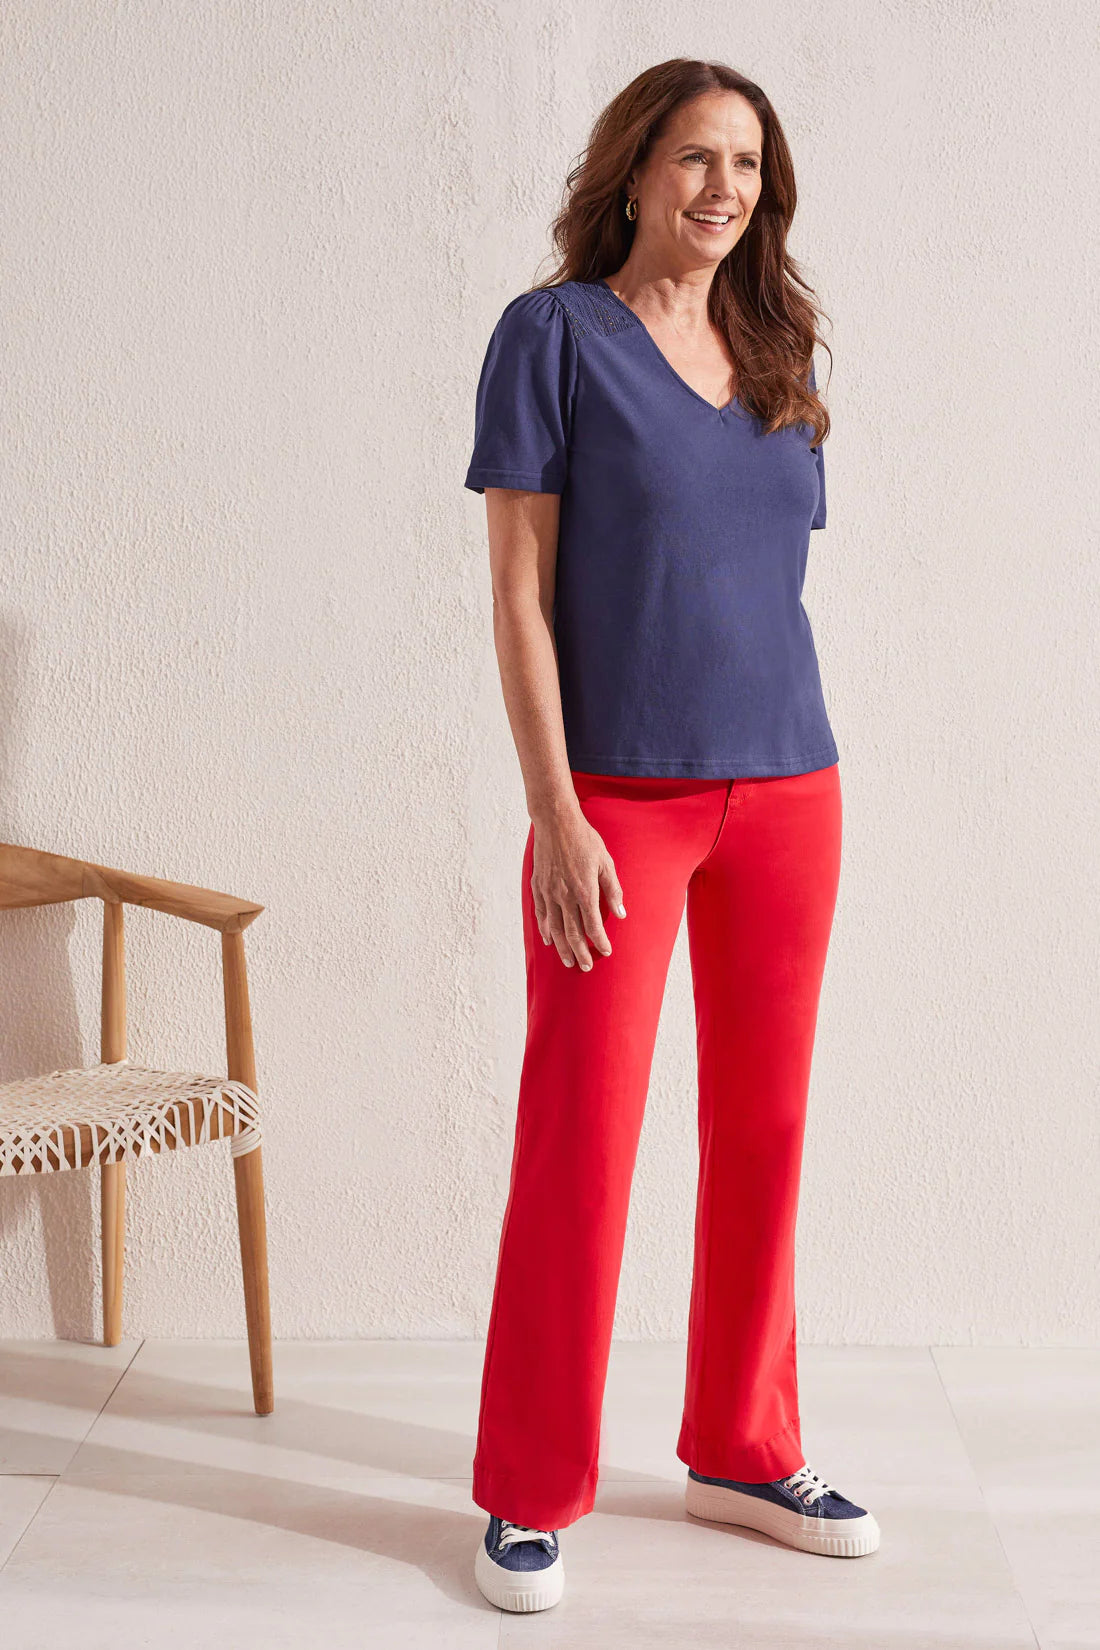 This short-sleeve top is your new closet staple thanks to comfy cotton slub fabric and special details that make it stand out from the crowd. 